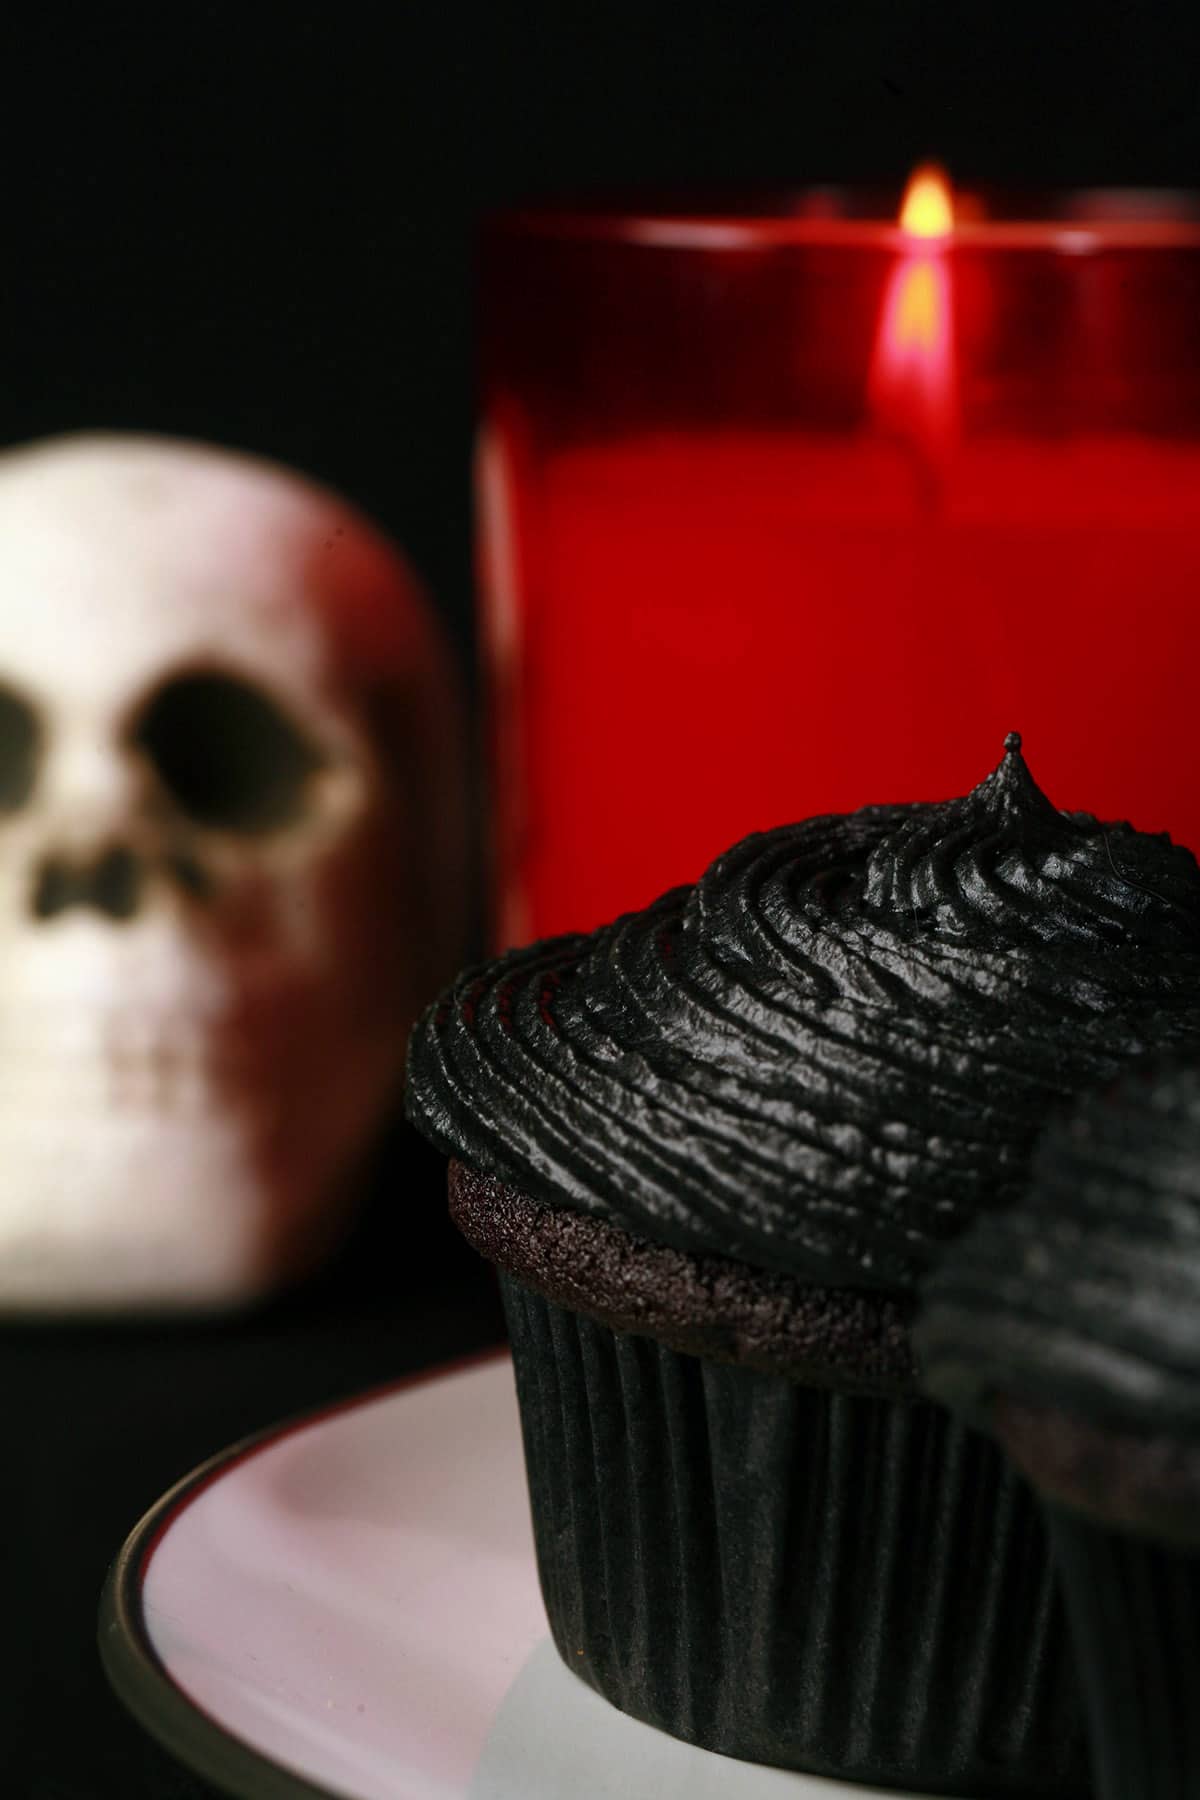 A black velvet cupcake on a white plate, with a skull and red candle in the background.